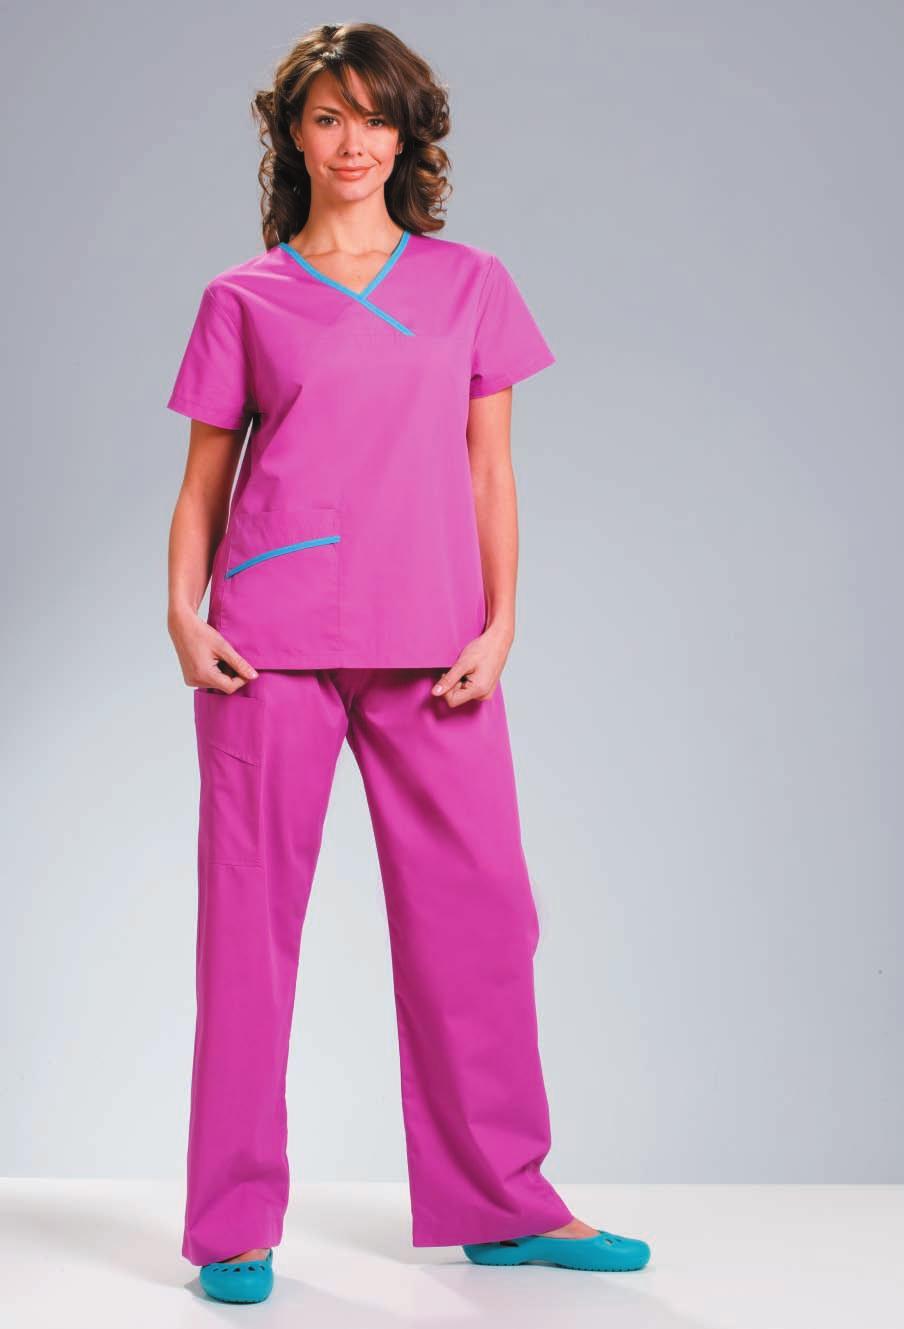 T023 Mock-wrap v-neck ladies scrub top. Simplistic clean-cut design for staff that need practicality with a hint of style. Great designs that transform your image!